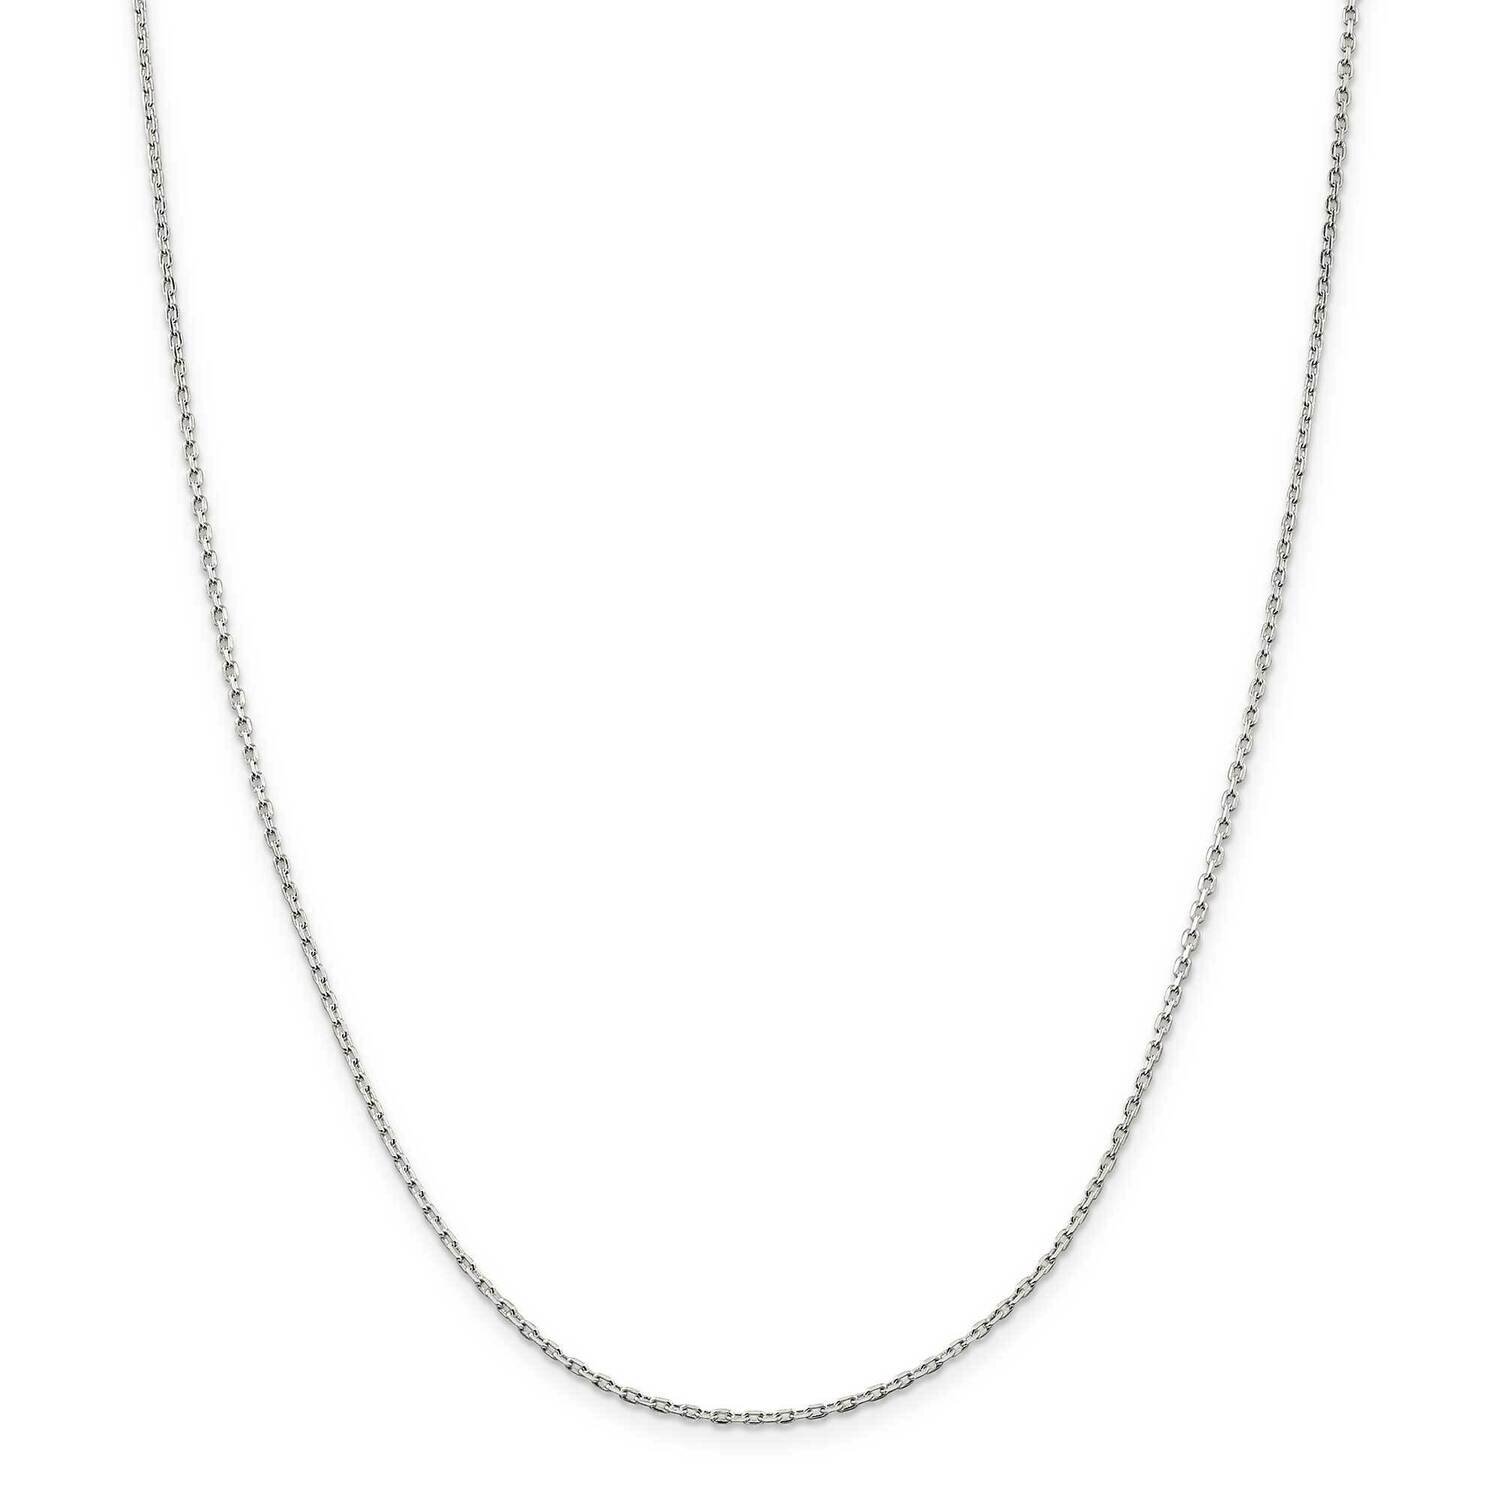 1.5mm Beveled Oval Cable Chain 26 Inch Sterling Silver QCA050-26